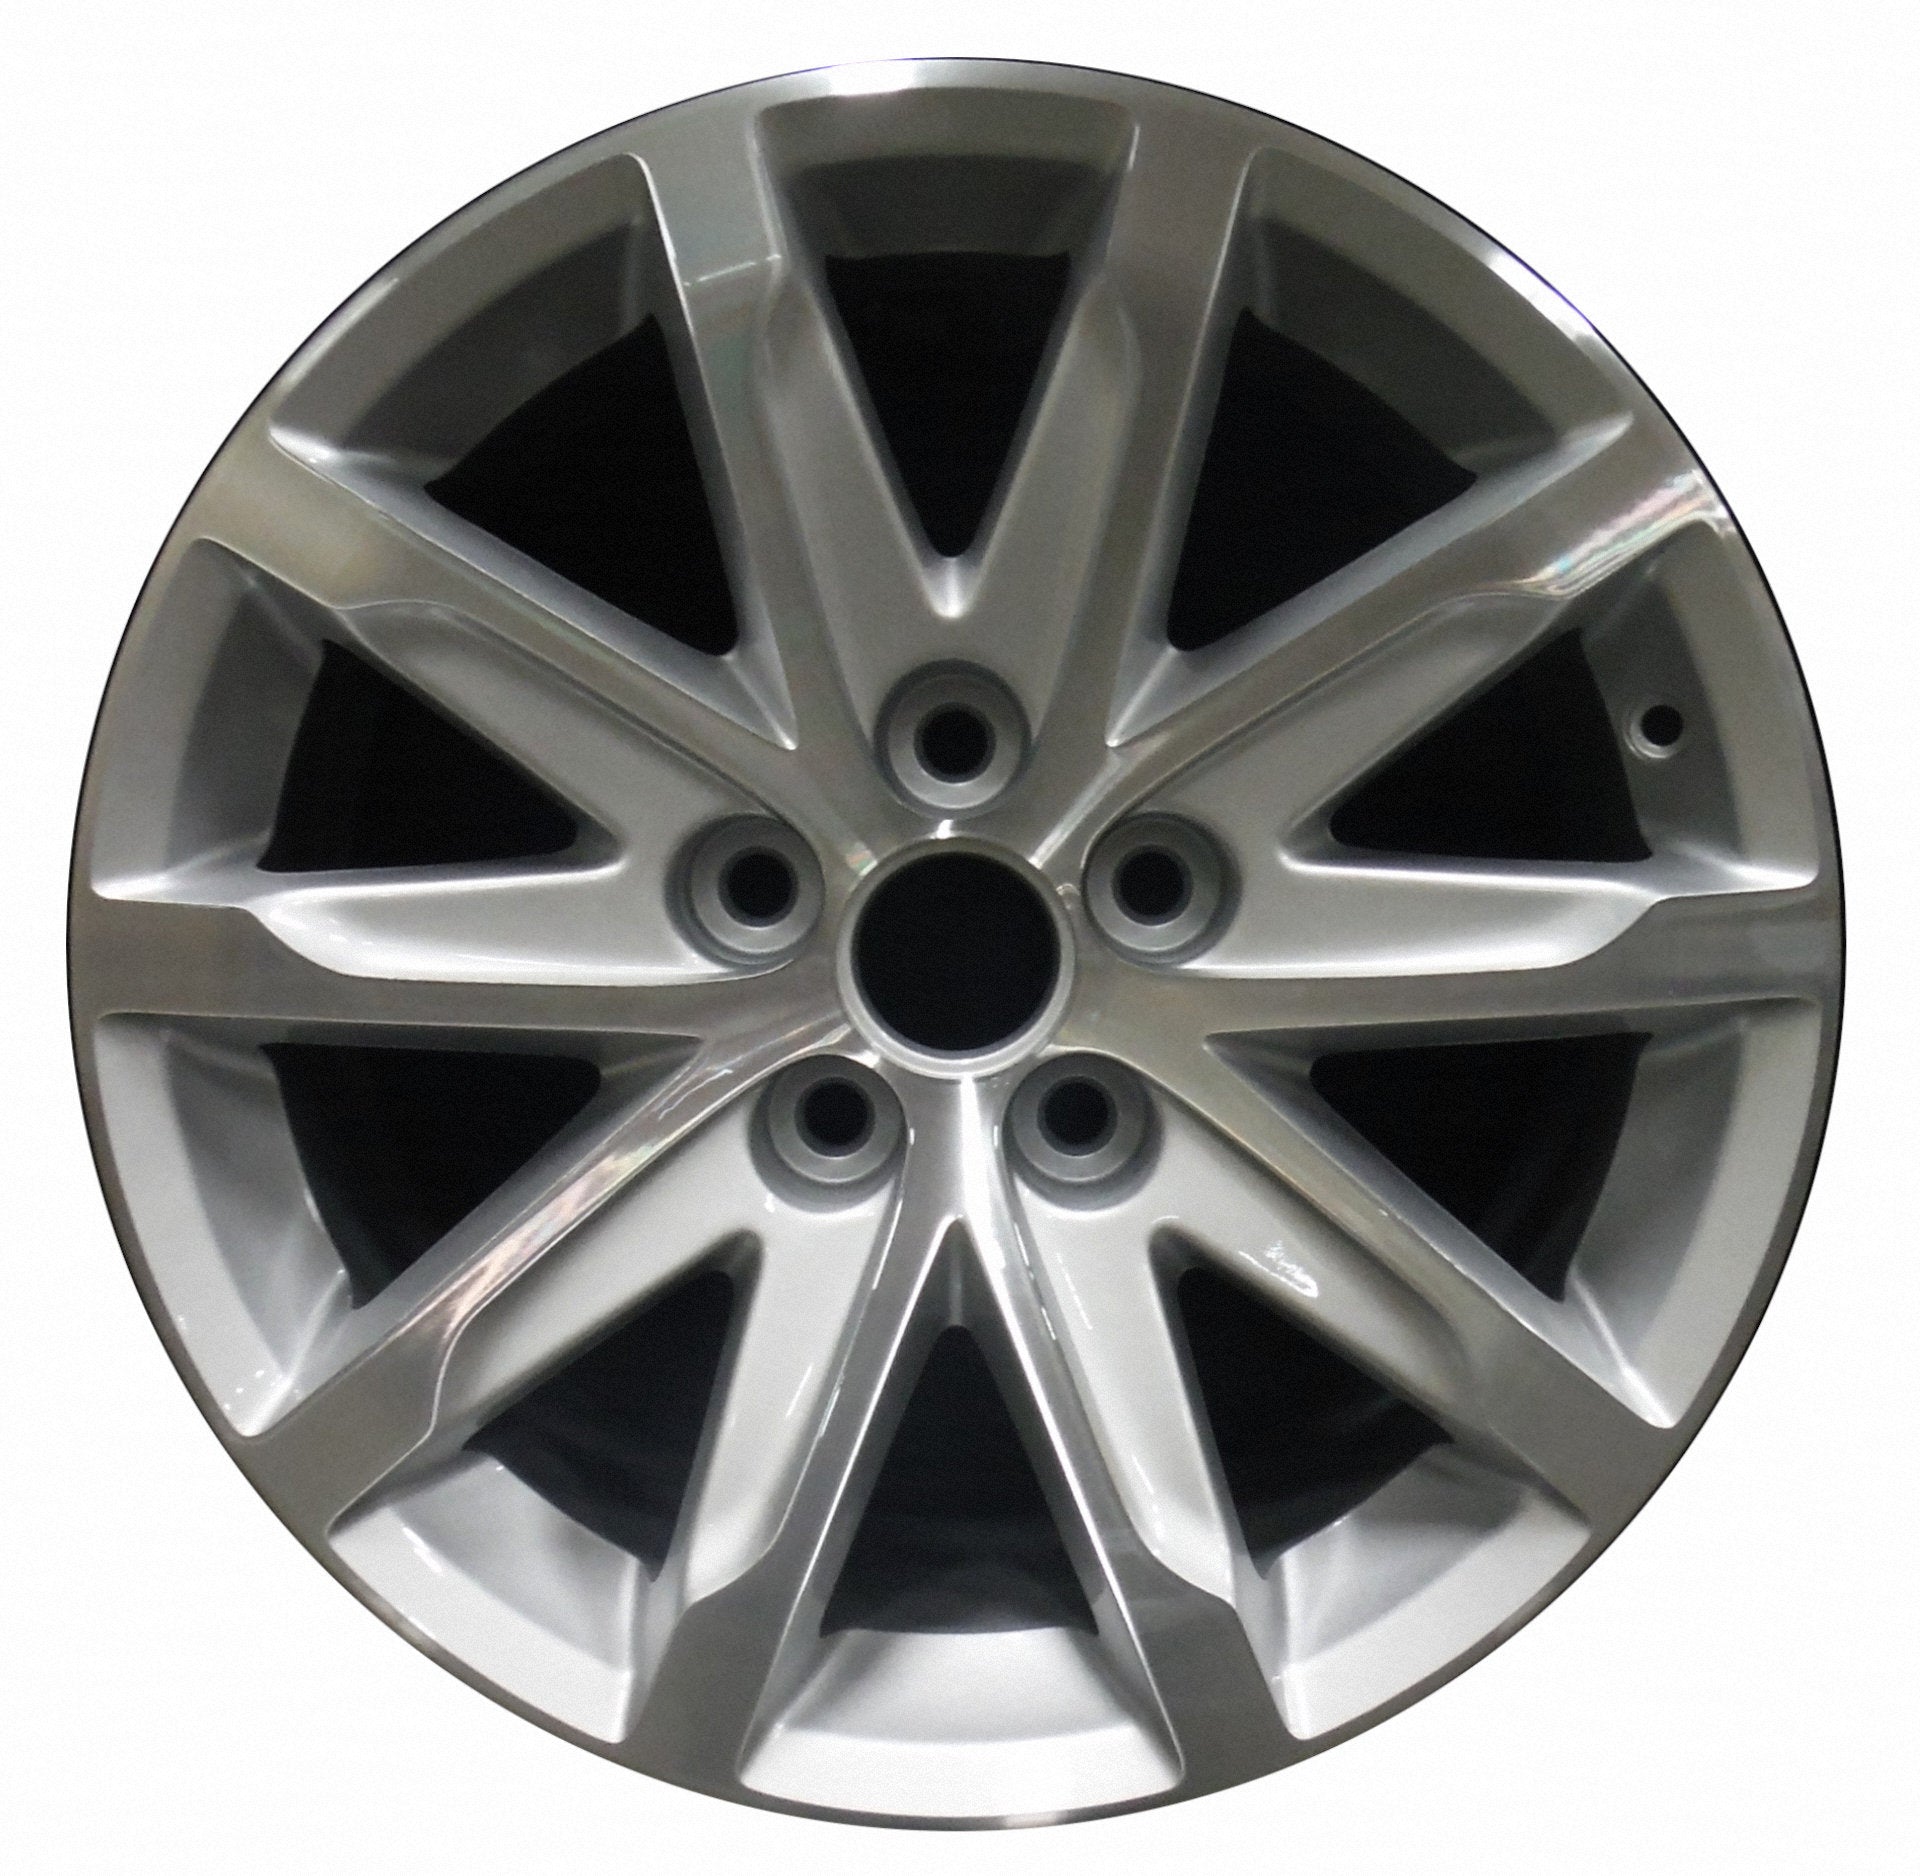 Cadillac CTS  2014, 2015, 2016 Factory OEM Car Wheel Size 17x8.5 Alloy WAO.4712.LS09.MABRT